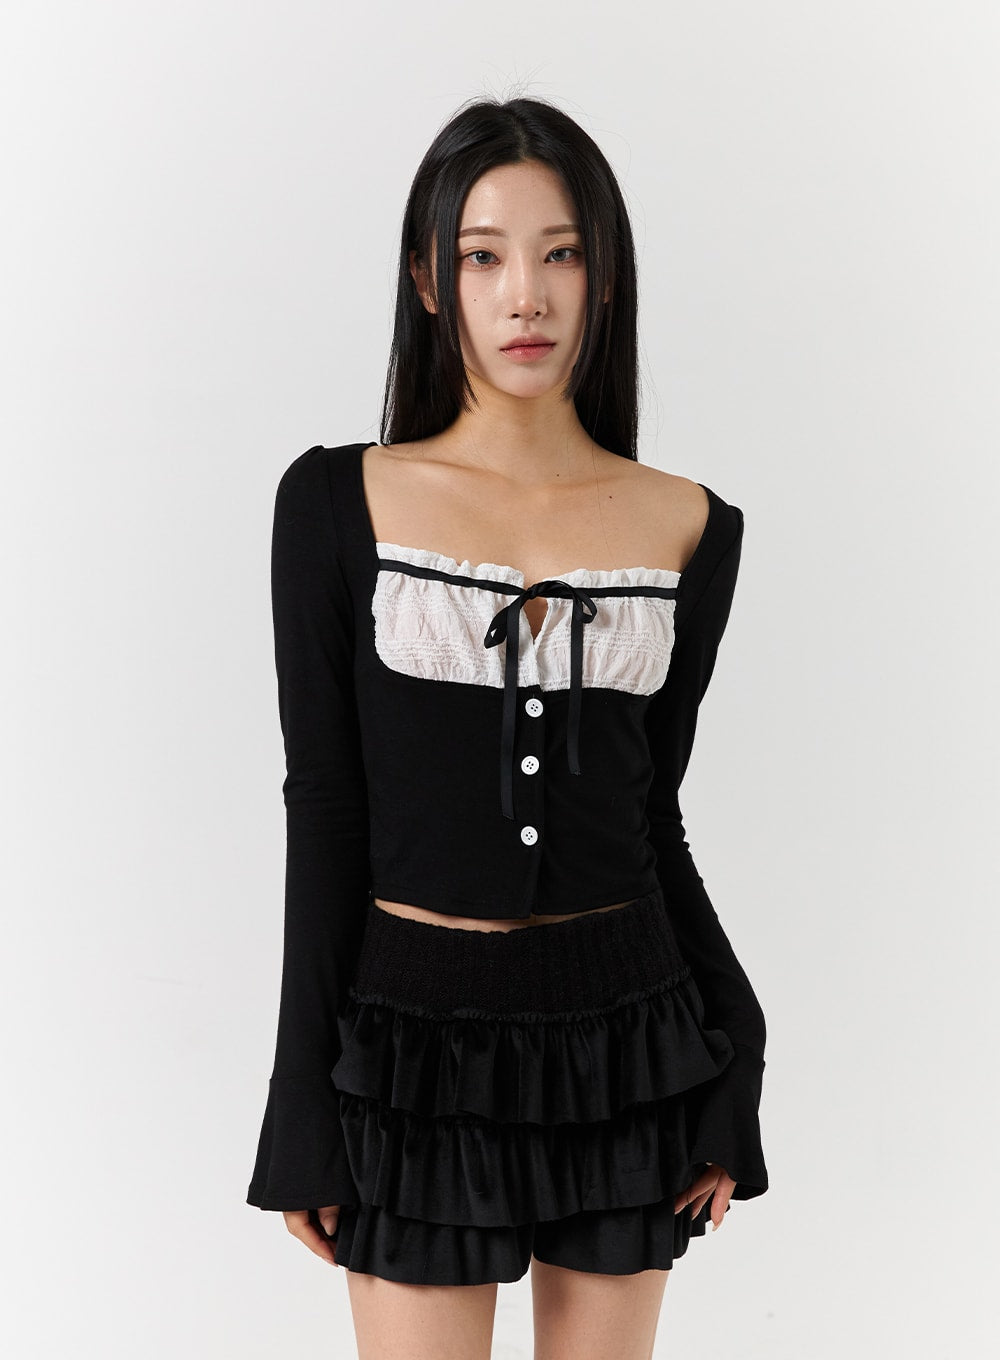 square-neck-bowknot-long-sleeve-crop-top-cd322